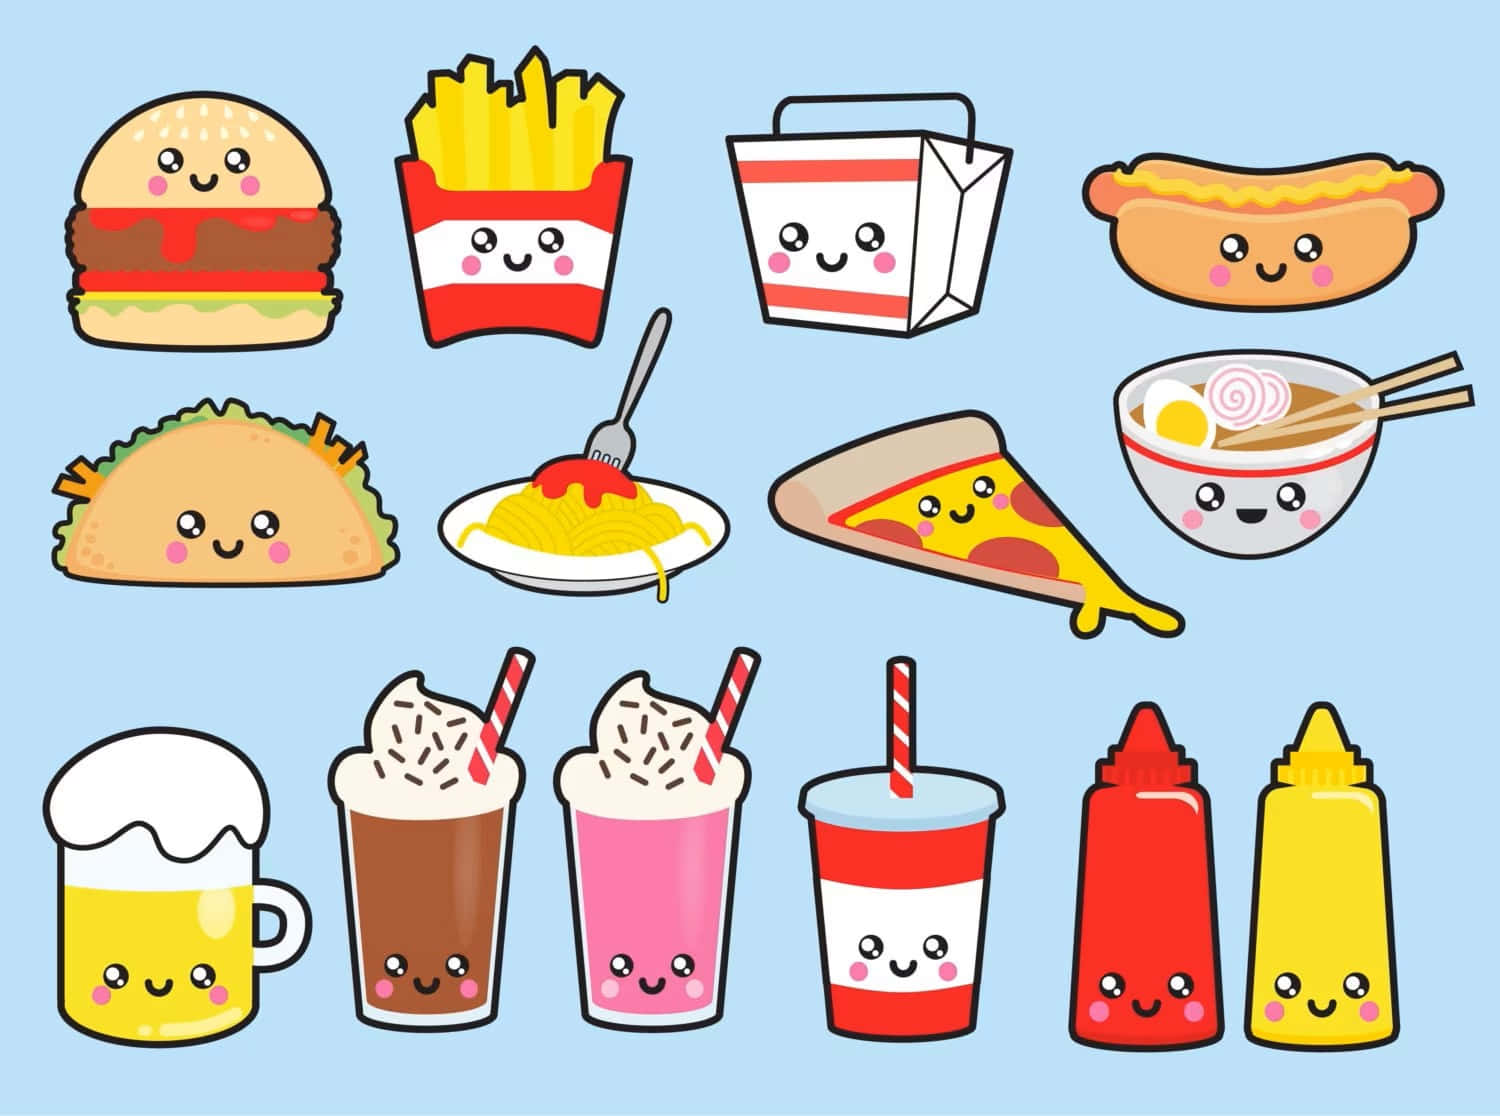 Caption: Adorable Kawaii Food Characters in a Delicious Party Wallpaper